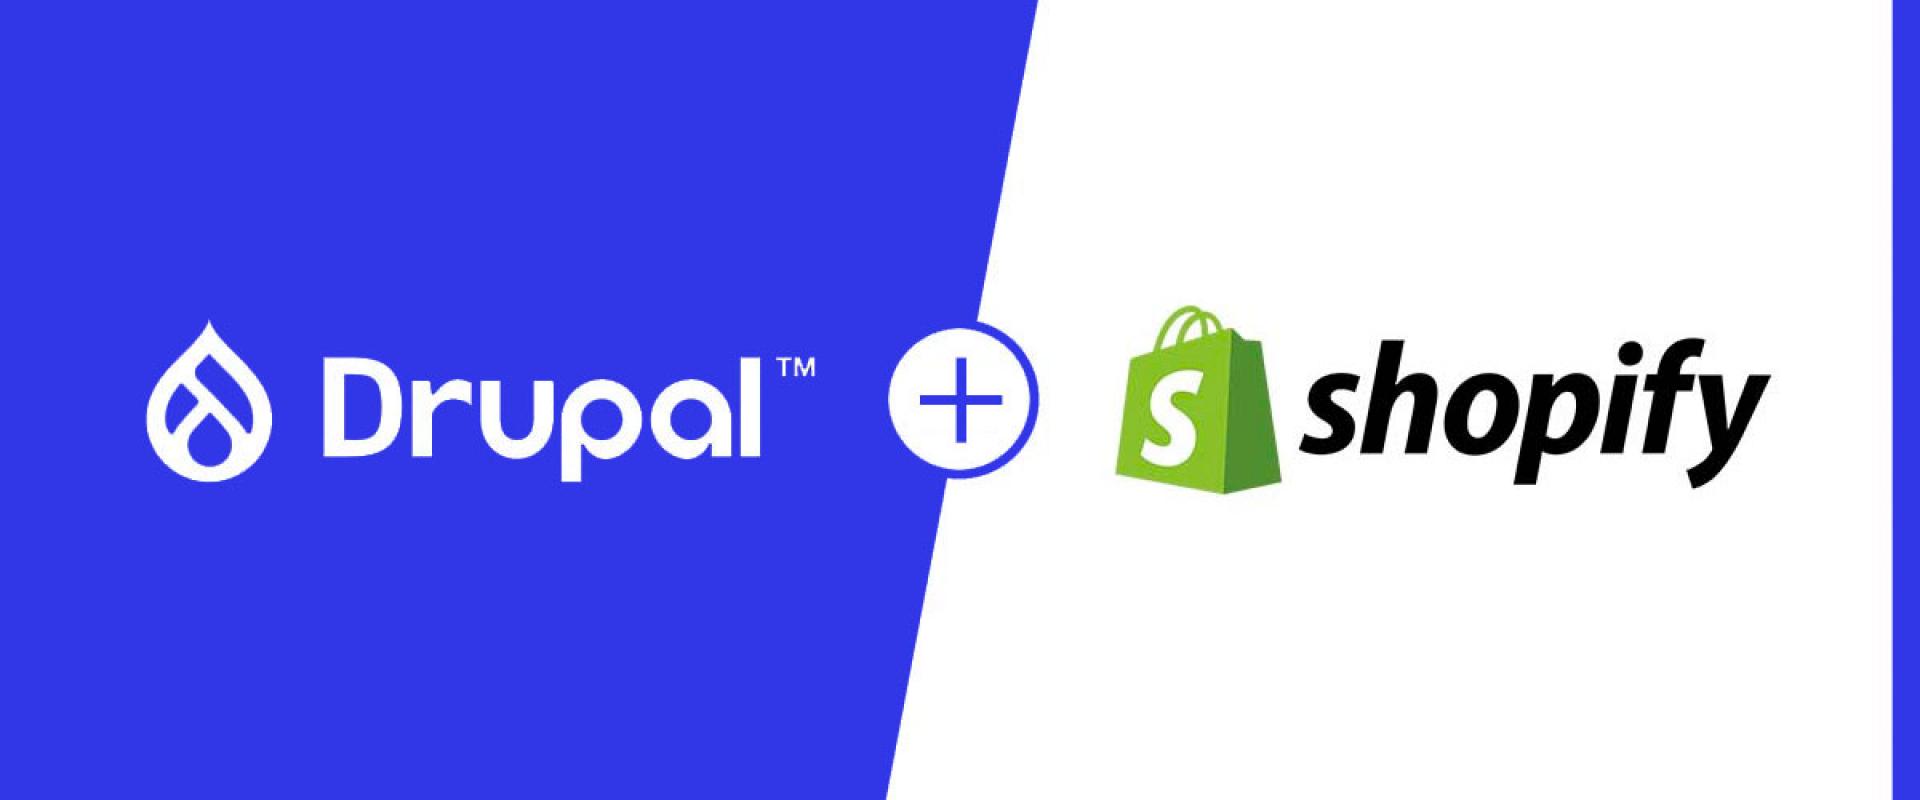 Installing a Drupal Site as an App in a Shopify Store